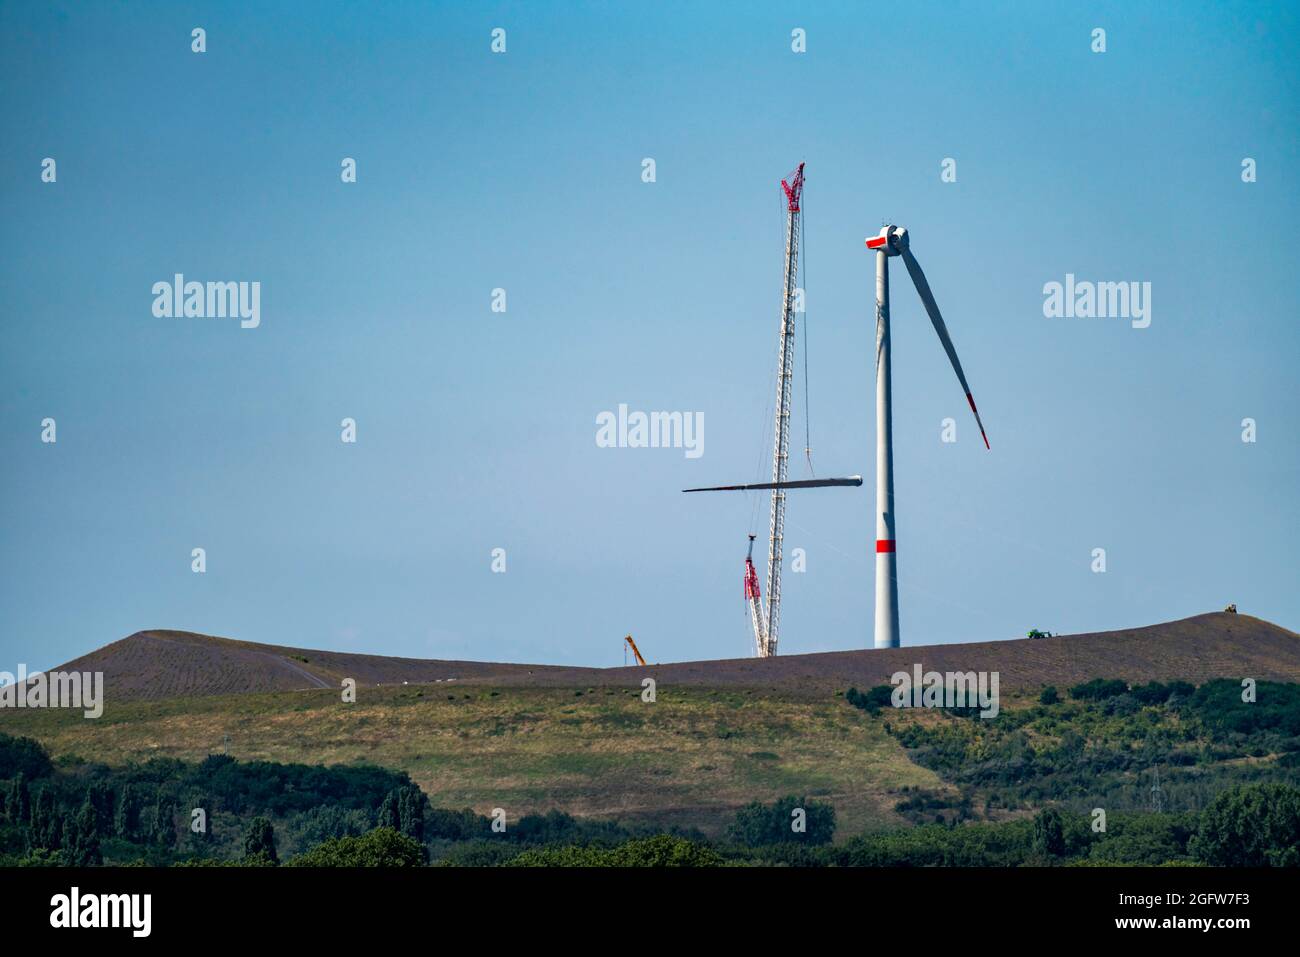 Construction of a wind turbine, by Enercon, on the Mottbruchhalde, in Gladbeck-Brauck, operated by the energy company STEAG, NRW, Germany. Stock Photo